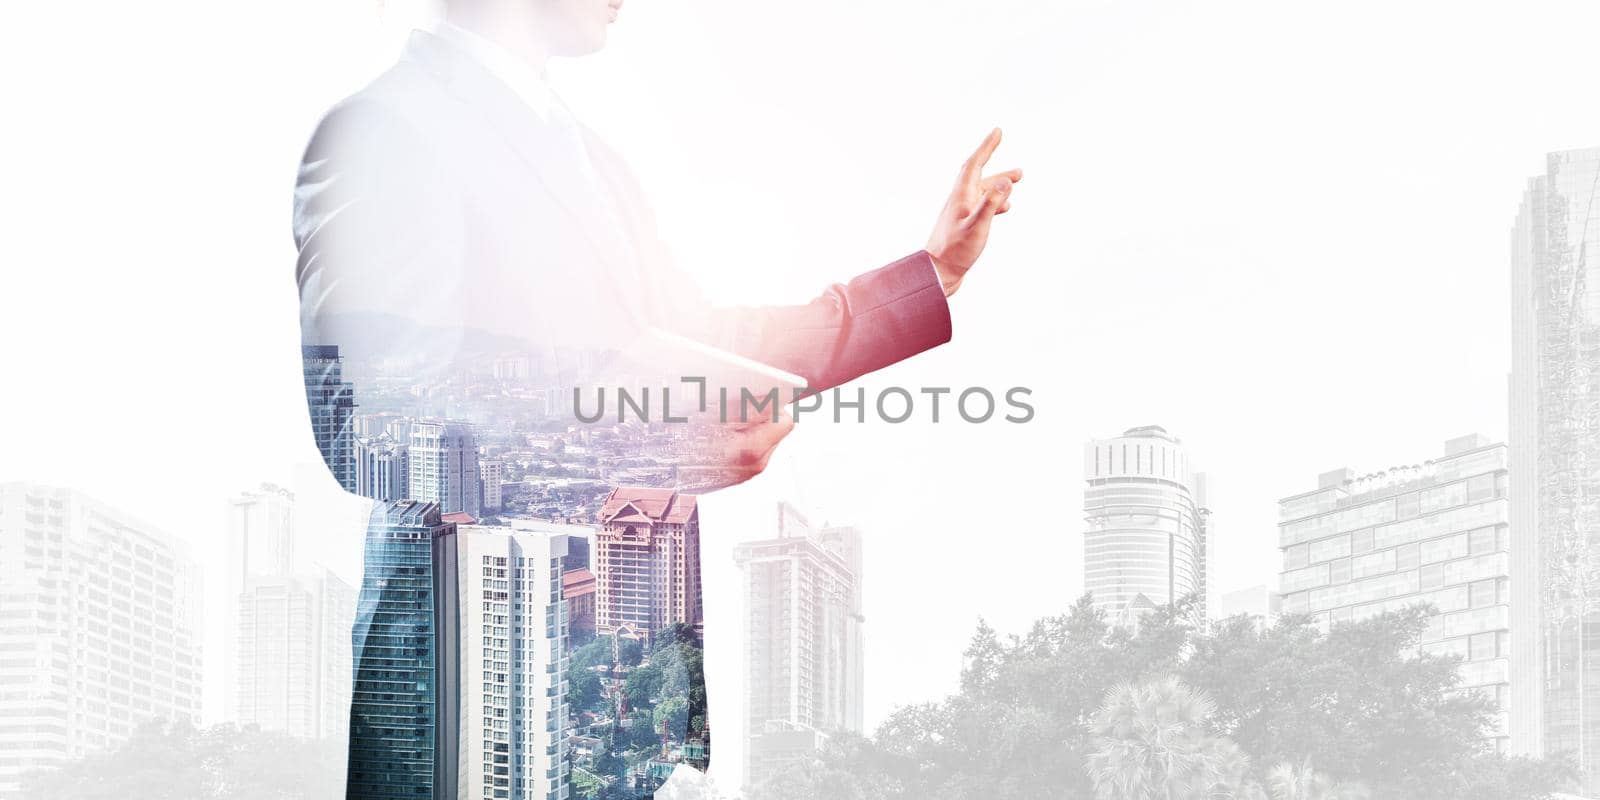 Businessman pointing on empty space on background modern cityscape. Standing entrepreneur in business suit and tie without face. Double exposure template. Blank screen ready for business message